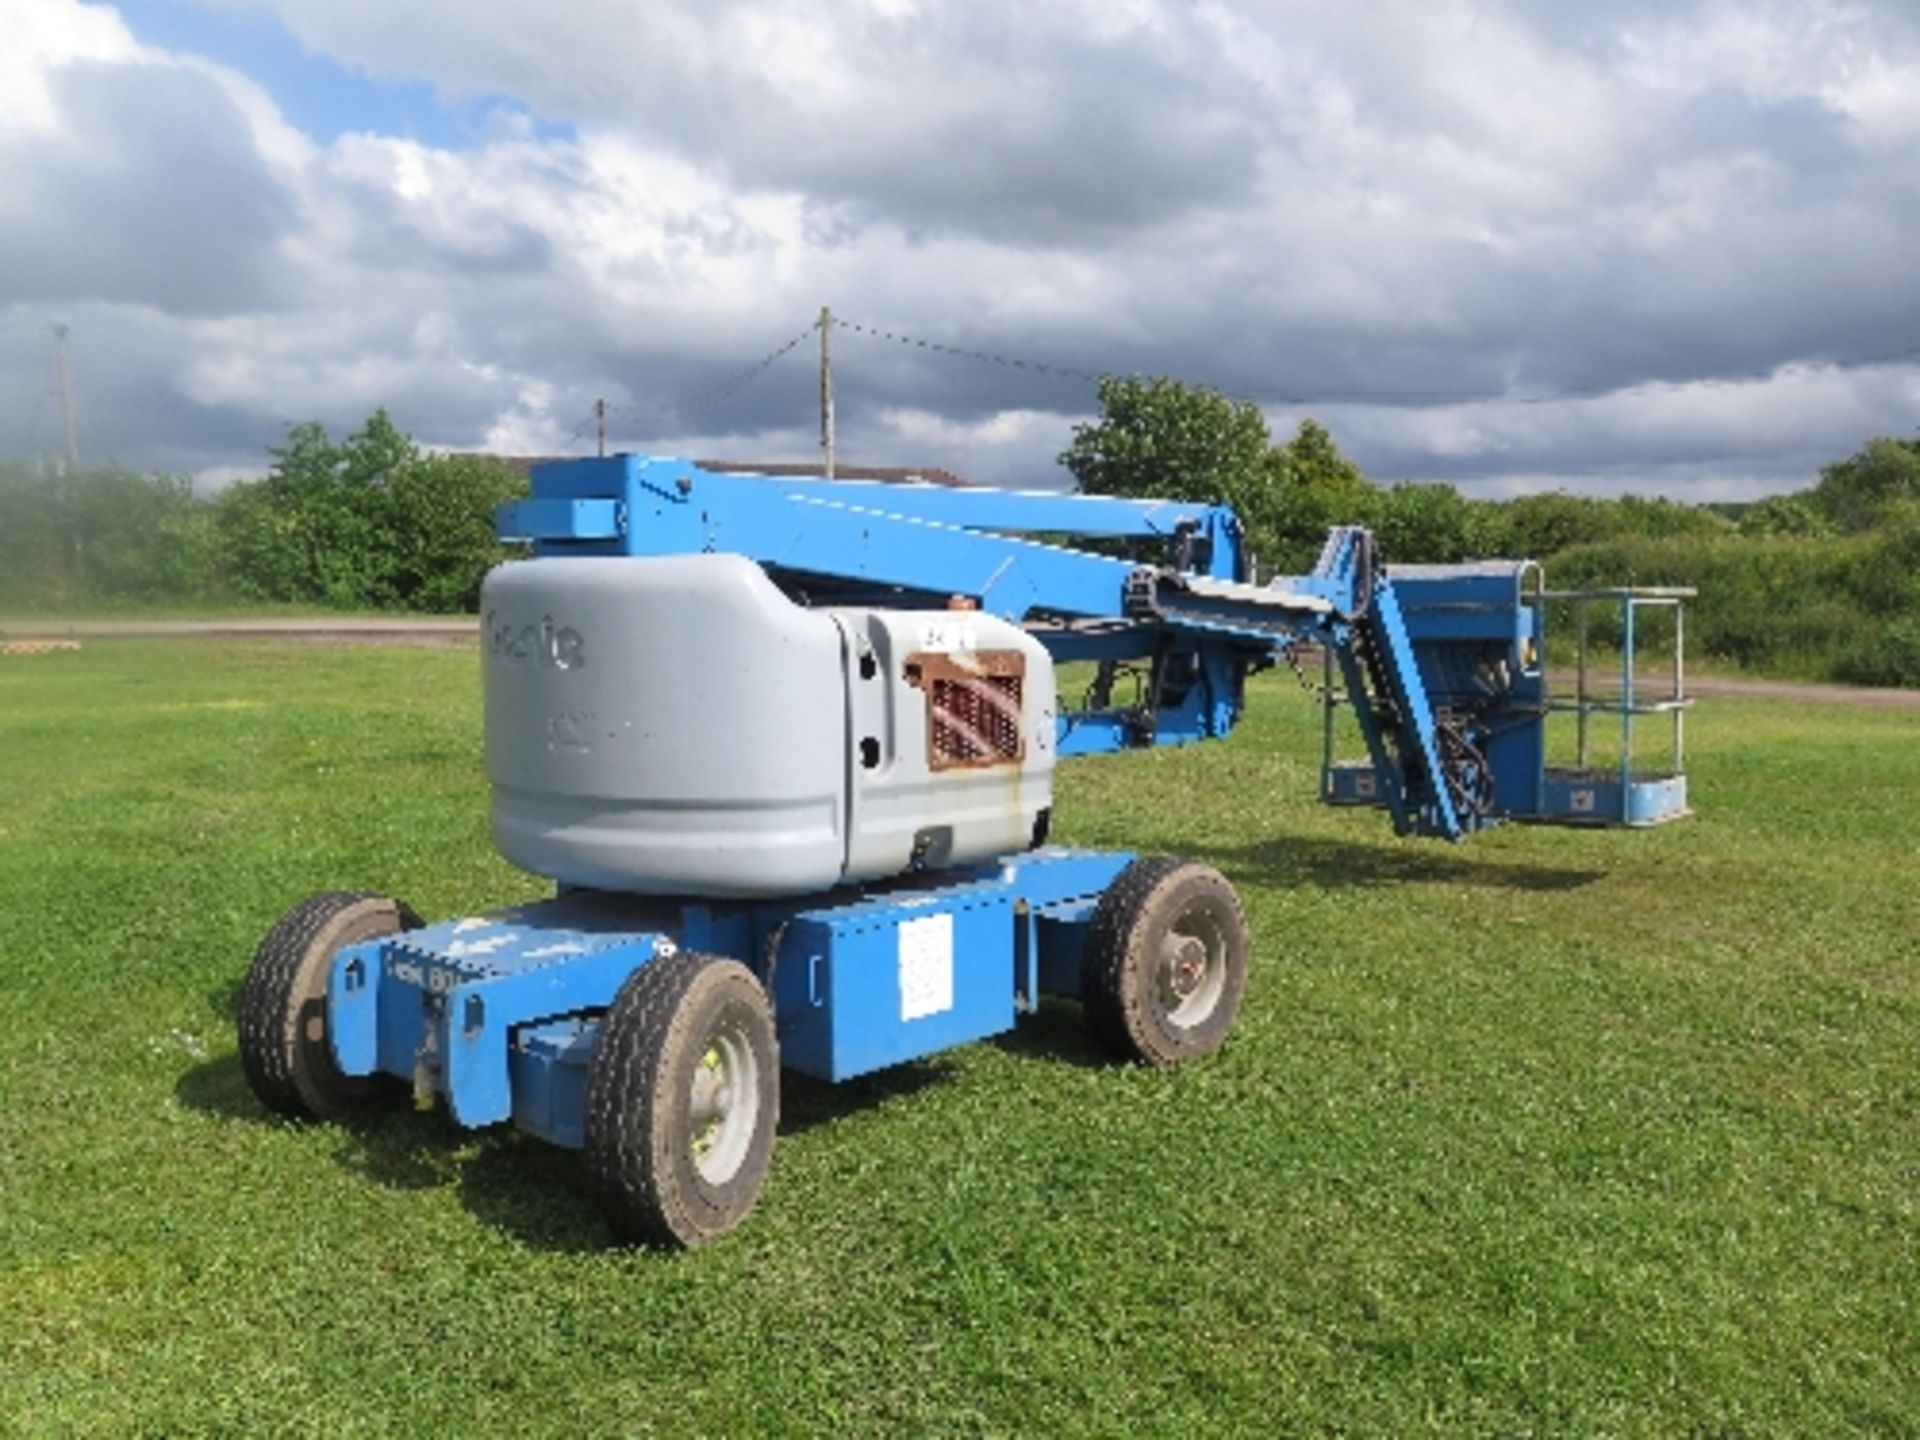 Genie Z45/25 Bi-fuel artic boom boom 1370 hrs 2005 141495ALL LOTS are SOLD AS SEEN WITHOUT